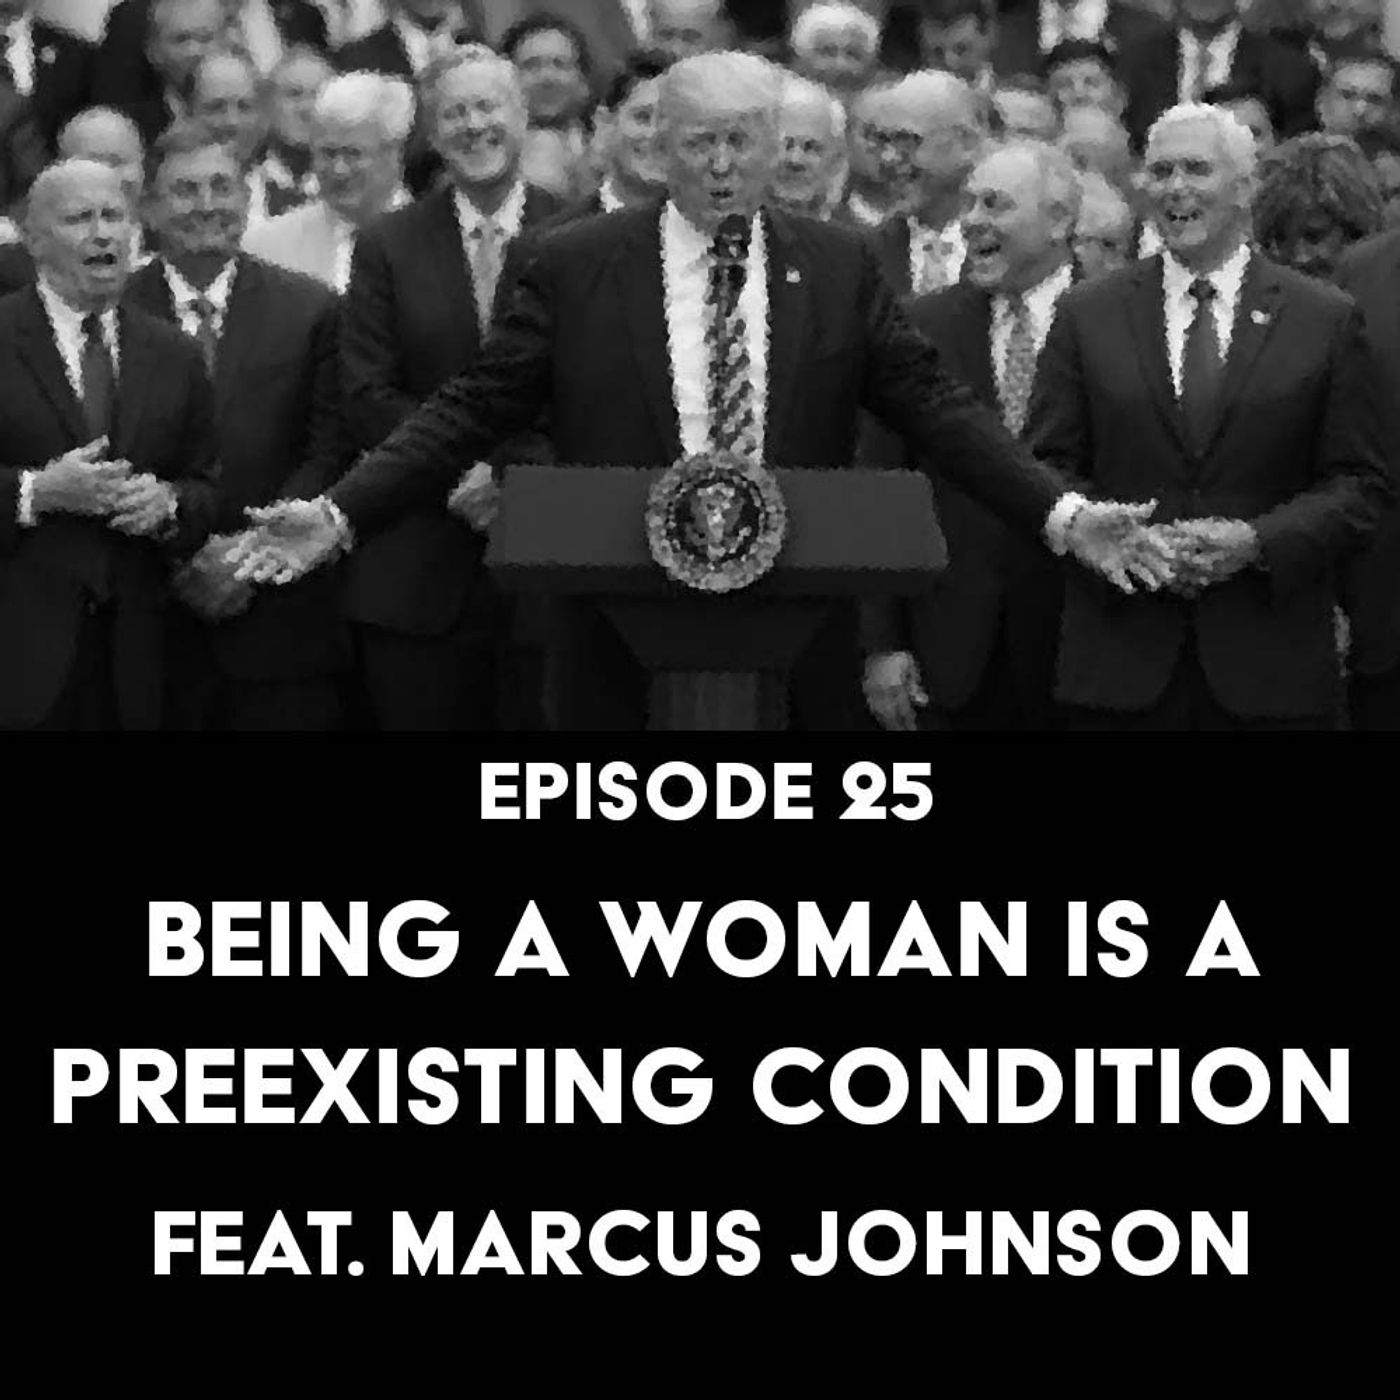 S1 Ep25: Being A Woman is a Preexisting Condition f/ Marcus Johnson